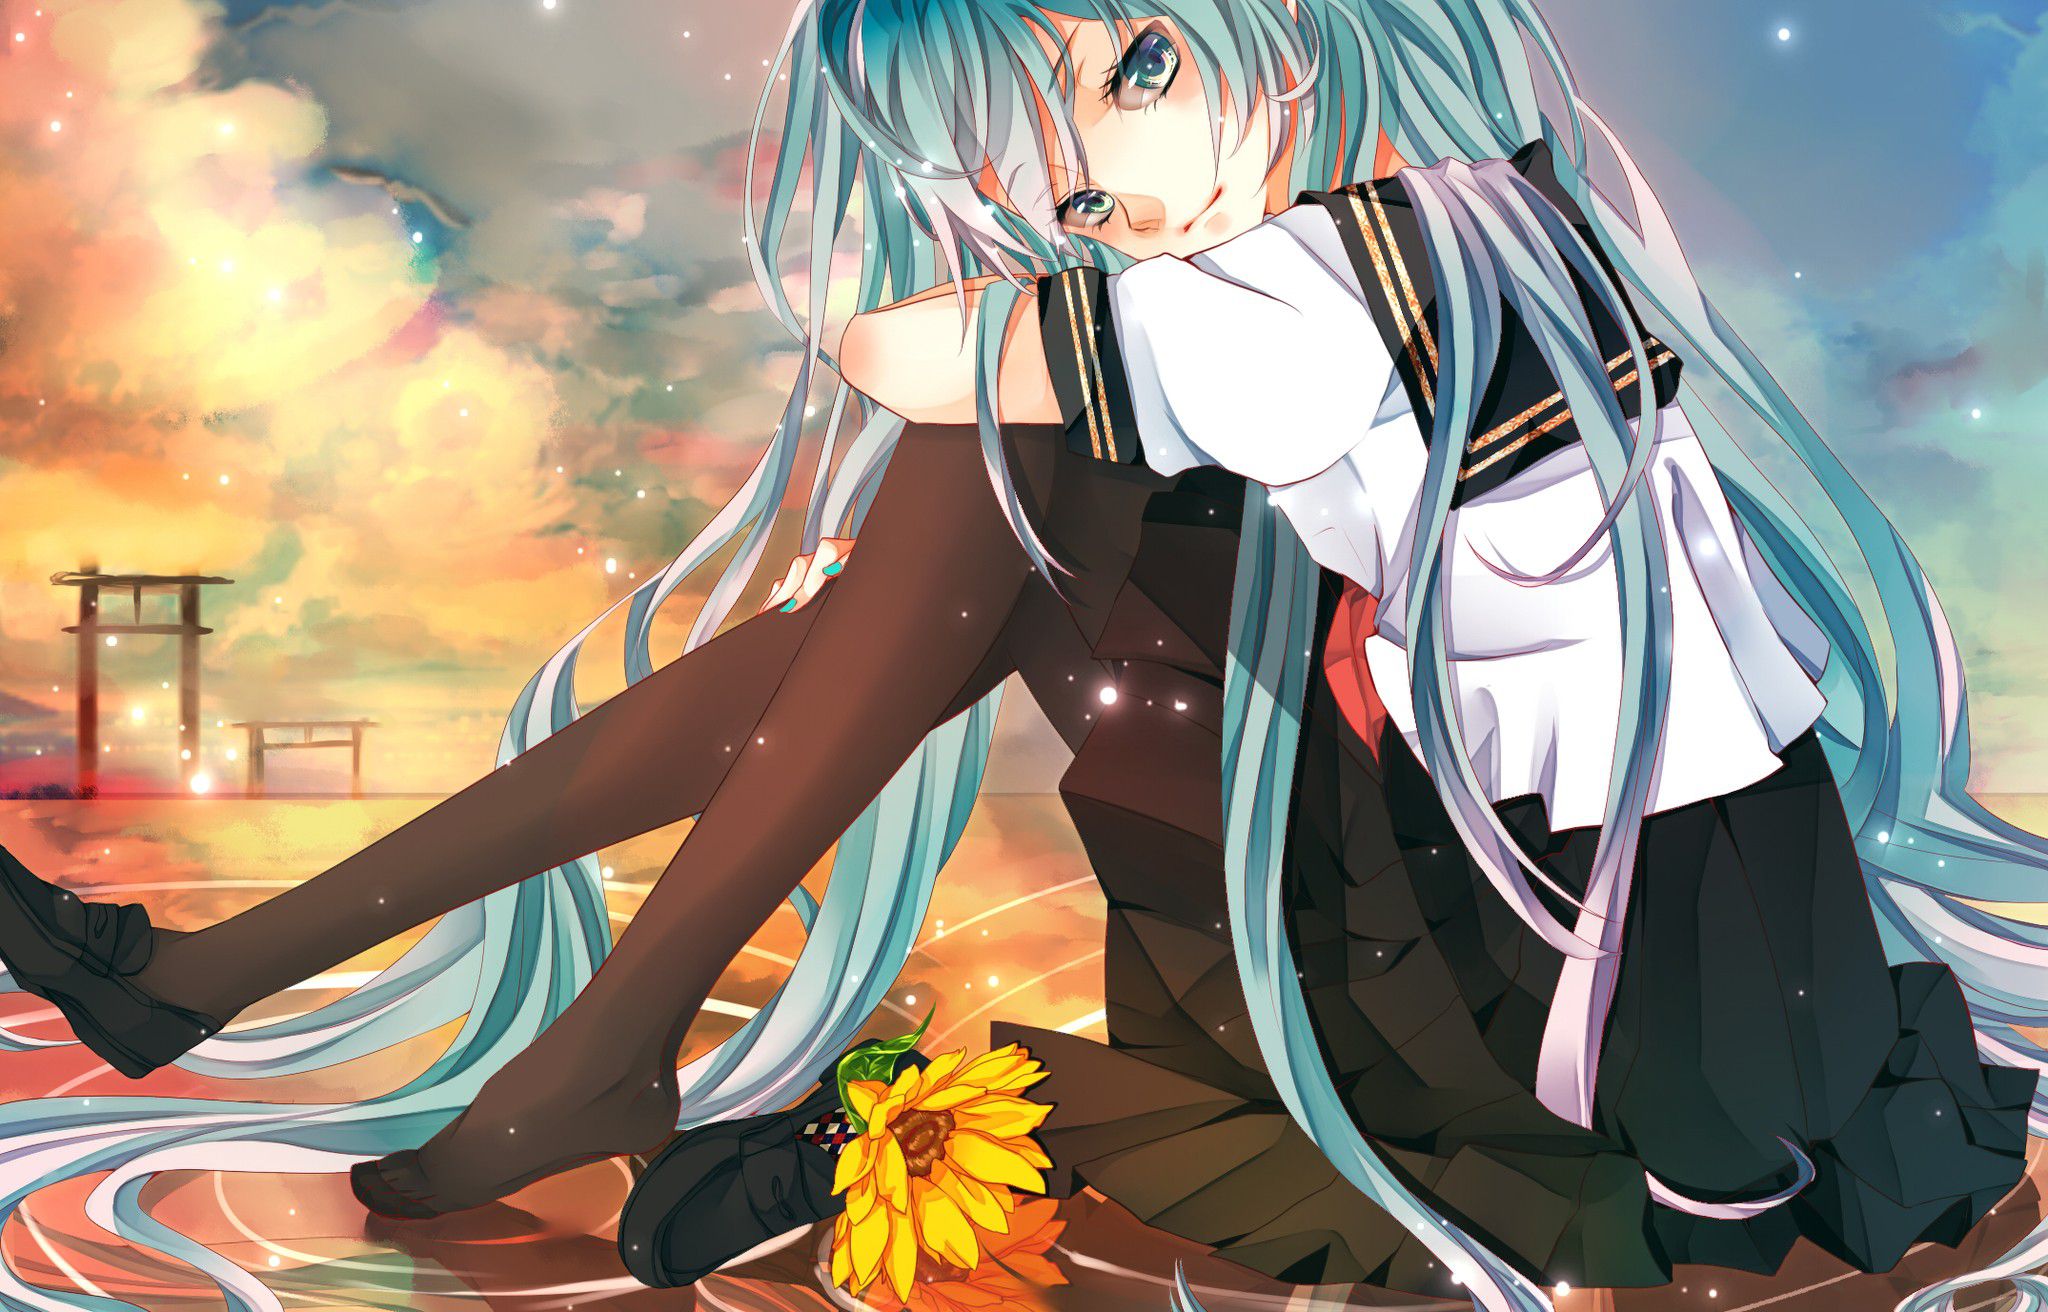 [Secondary] [VOCALOID] want to see images of miku dressed in school uniform! 3 10